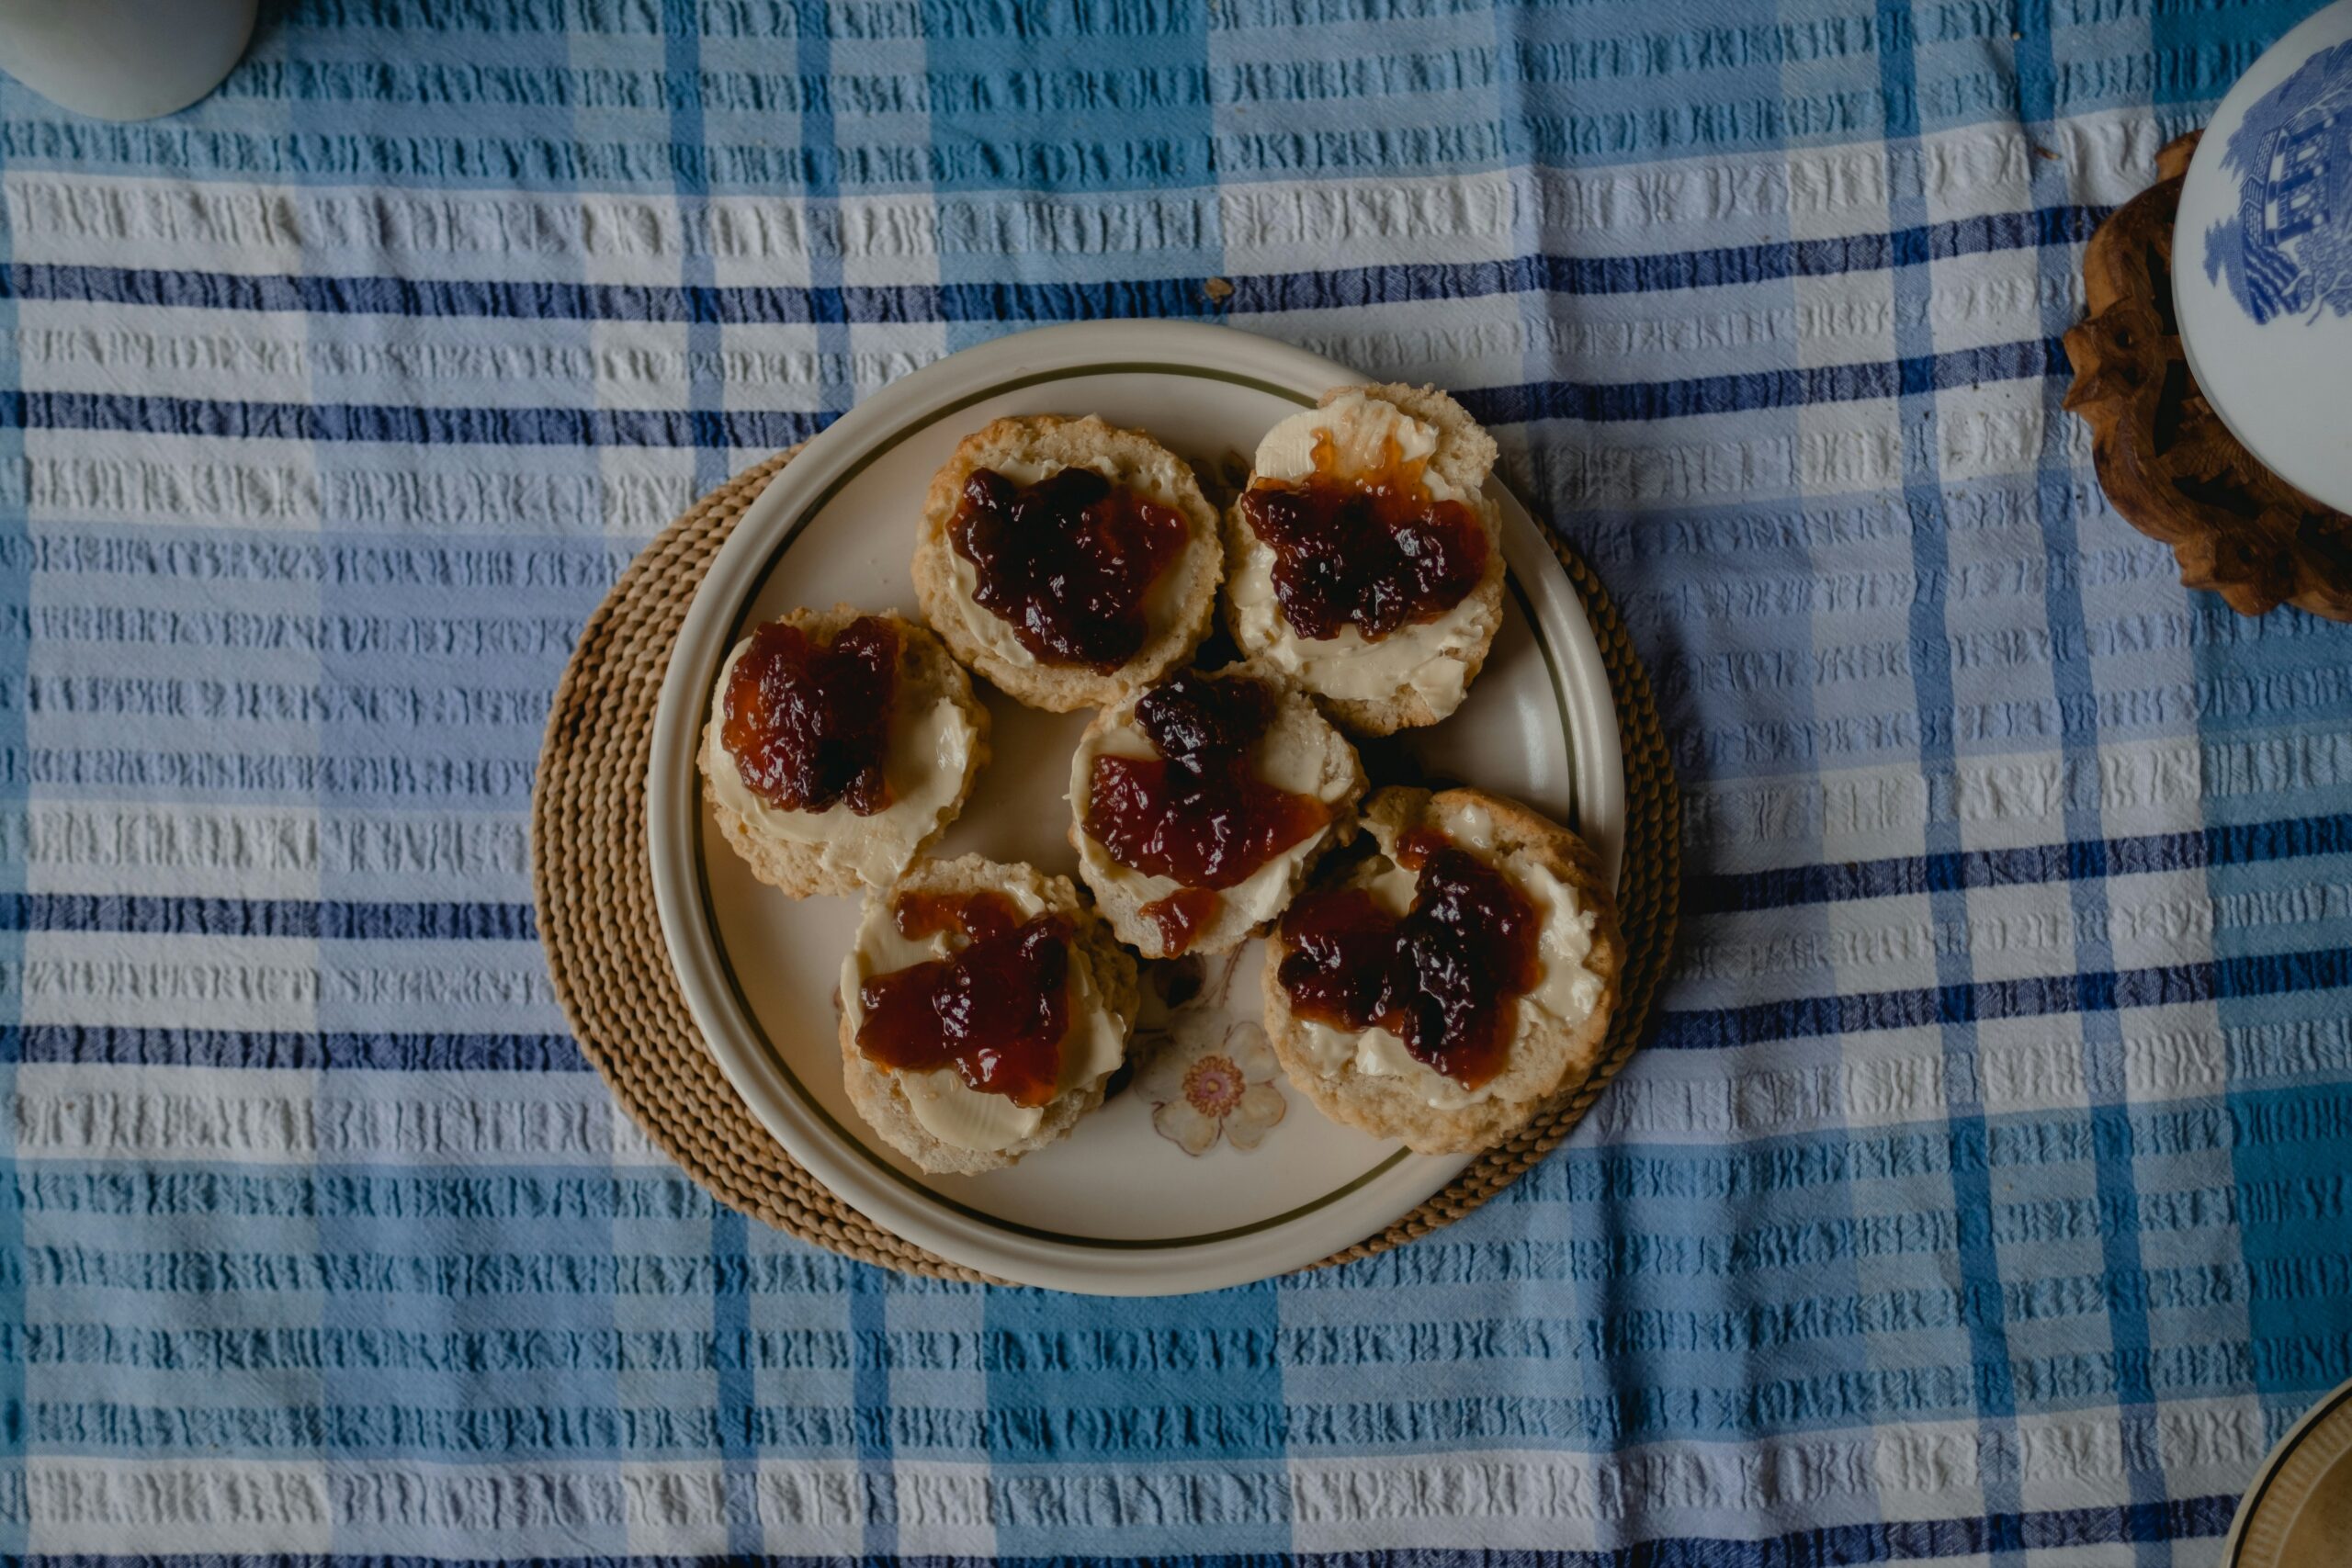 Scone wars: Why are British people so obsessed?